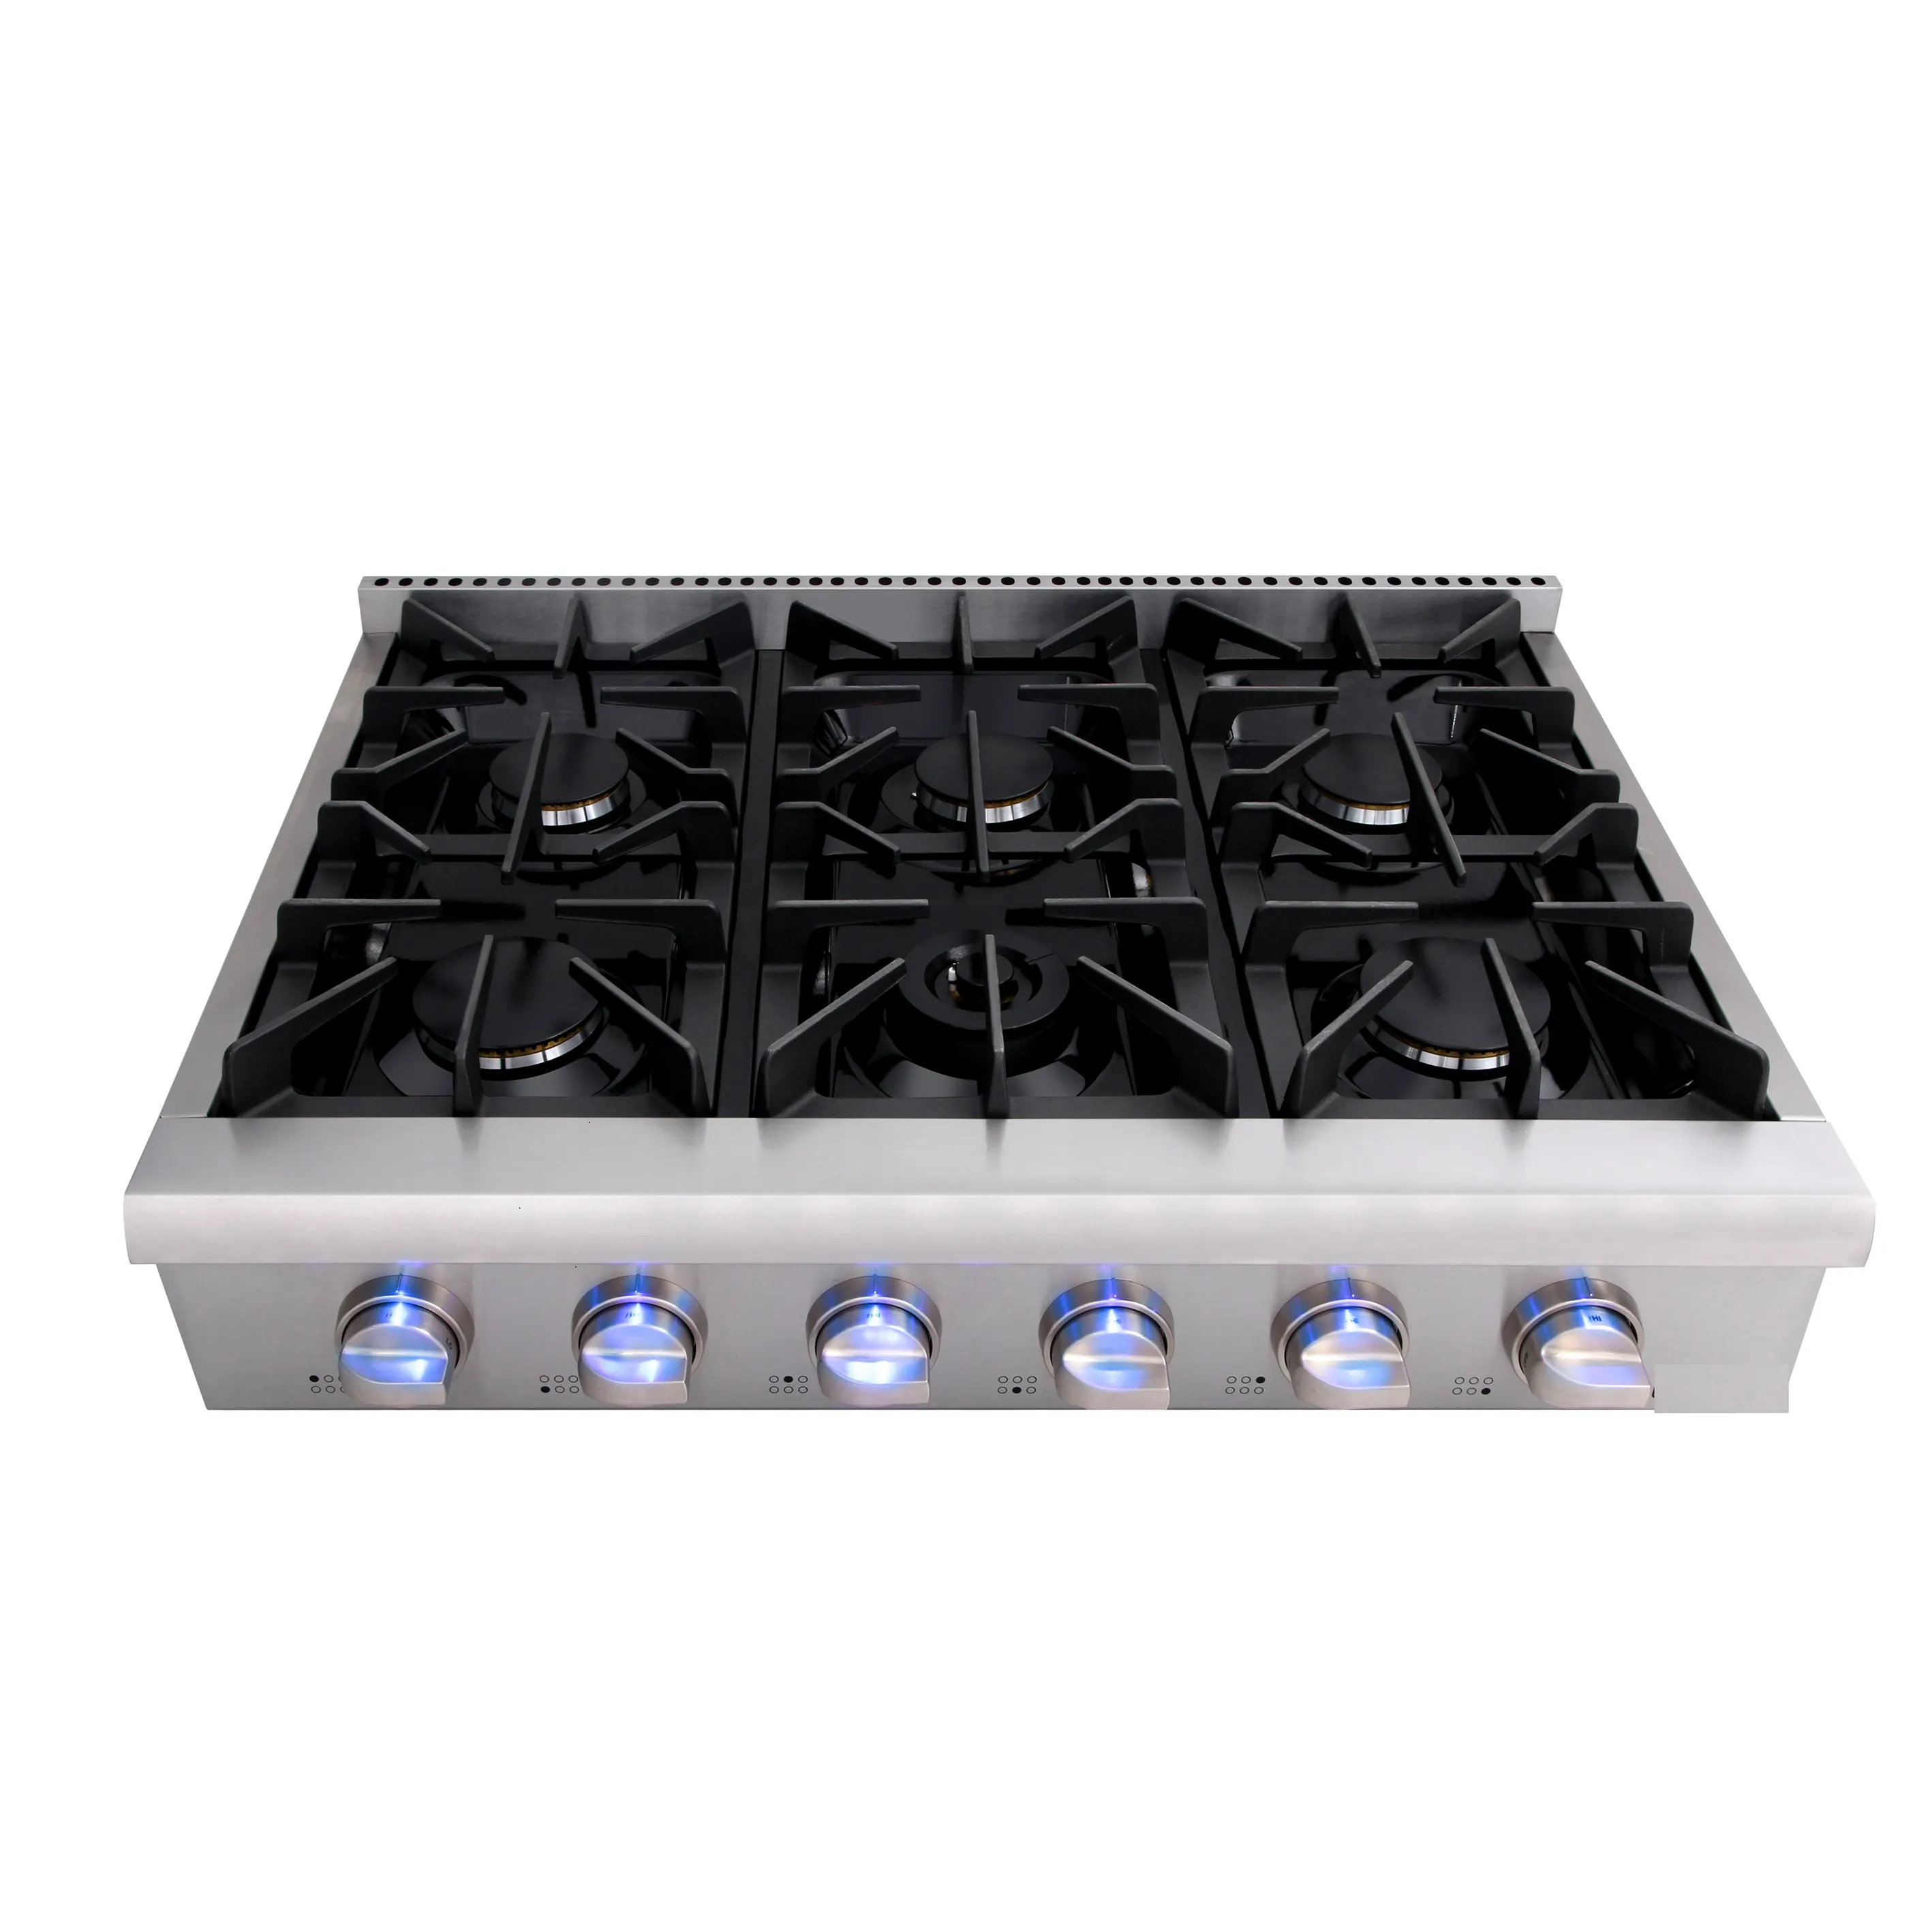 Hyxion Hot Selling With Led Light 2 burner cast propane cooktop counter free standing gas cooktop estufa gas glp stove